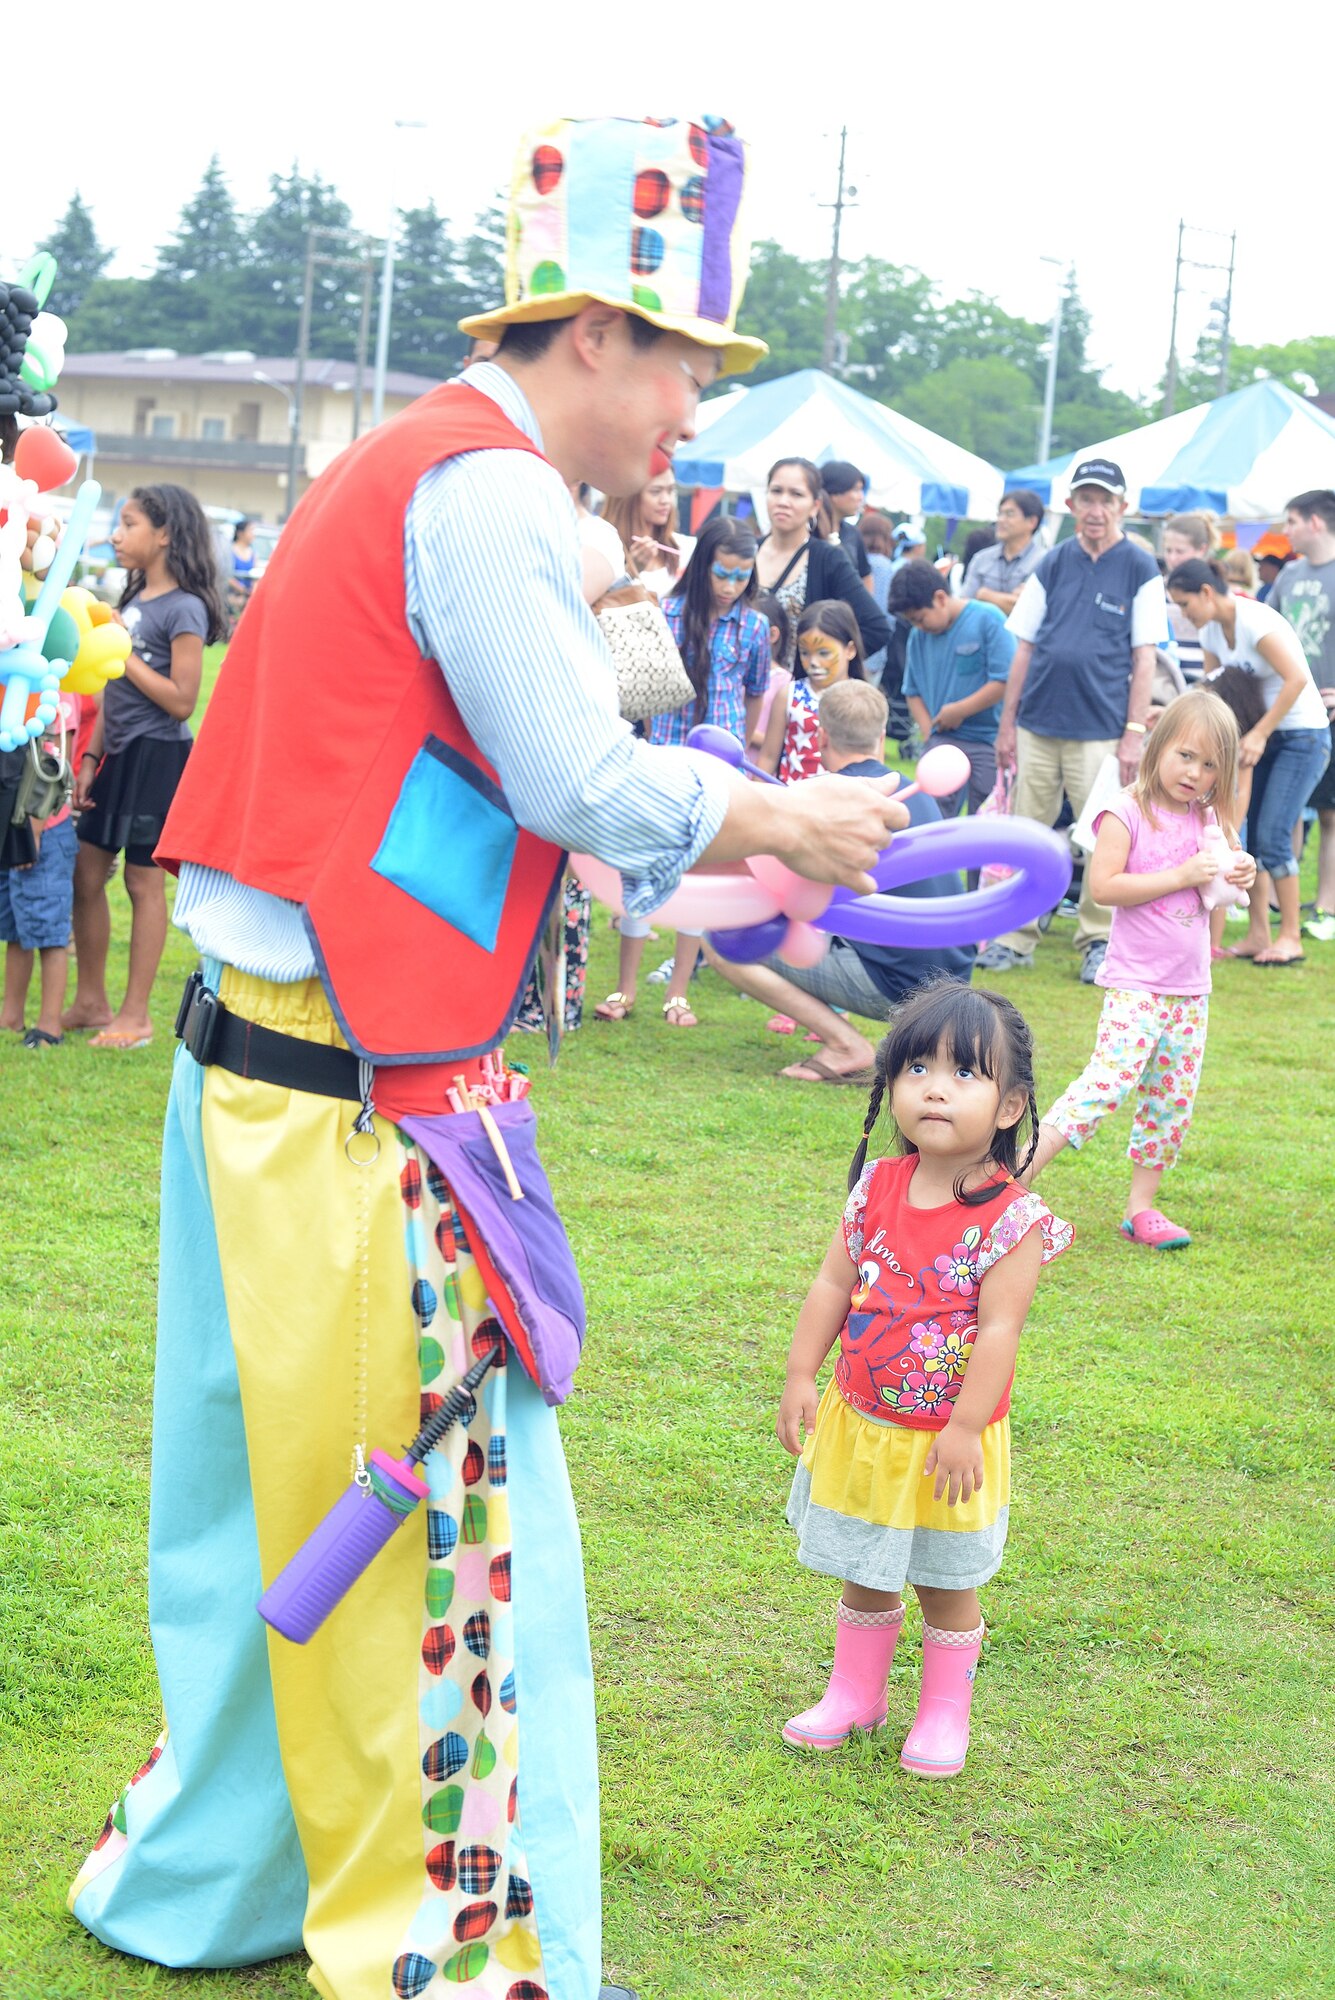 Travis Weaver shows national pride during Celebrate America at Yokota Air Base, Japan, July 2, 2015. The annual event provided military members and their families the opportunity to enjoy games, food and music culminating in a fireworks display over the Yokota airfield to celebrate Independence Day. (U.S. Air Force photo by Airman 1st Class David C. Danford/Released)
